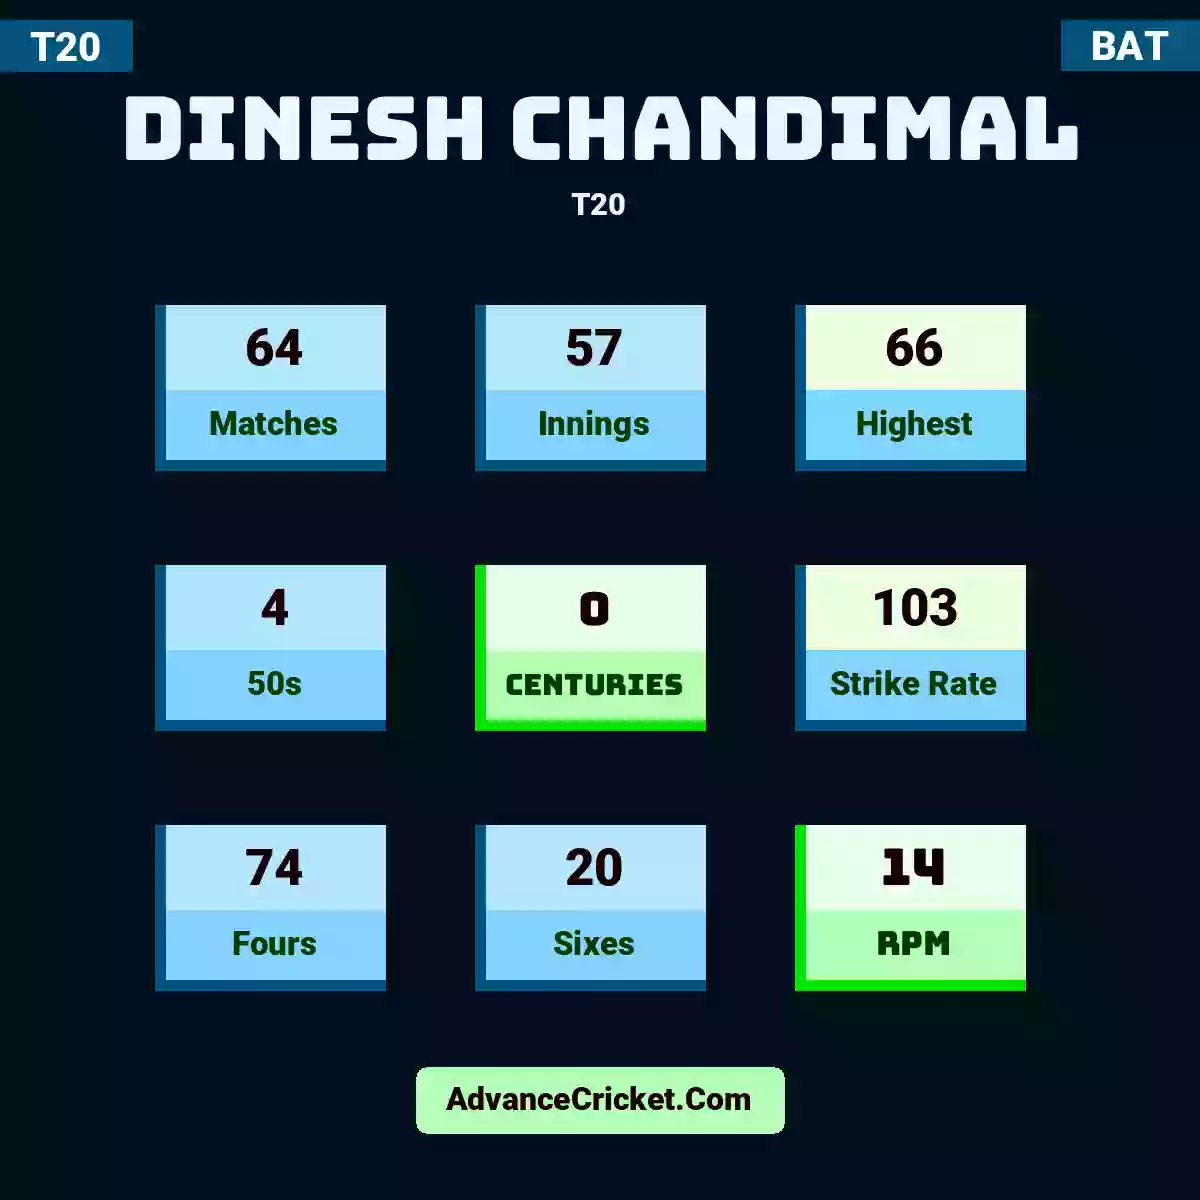 Dinesh Chandimal T20 , Dinesh Chandimal played 64 matches, scored 66 runs as highest, 4 half-centuries, and 0 centuries, with a strike rate of 103. D.Chandimal hit 74 fours and 20 sixes, with an RPM of 14.